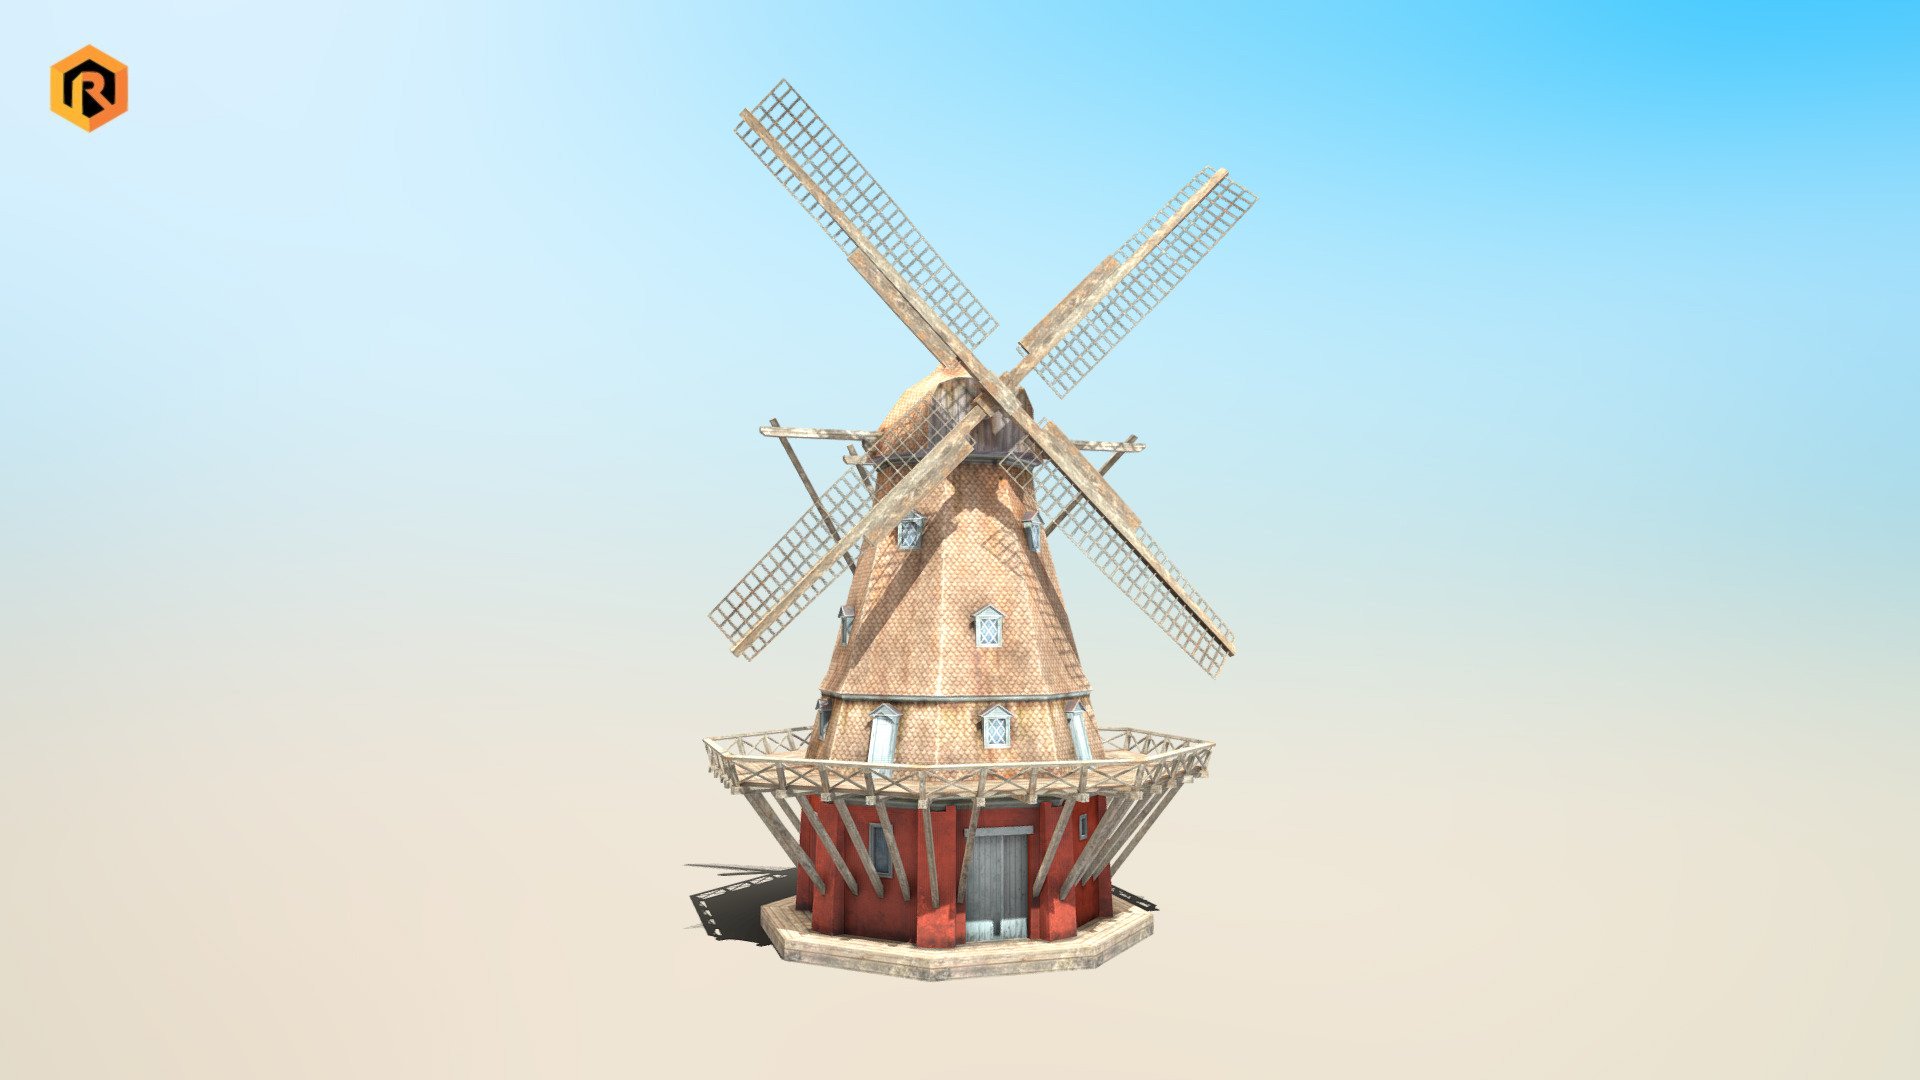 High-quality 3D low-poly model of Big Copenhagen Windmill.

Model is build with two meshes, main part and wing part.

It is best for use in games and other VR / AR, real-time applications such as Unity or Unreal Engine.

It can also be rendered in Blender (ex Cycles) or Vray as the model is equipped with proper textures.  

You can also buy this model in a bundle: https://skfb.ly/ovQJB

Technical details:


2048 x 2048 Diffuse and AO textures 
3732 Triangles 
2842 Vertices 
Model completely unwrapped 
Pivot points are centered to suit the animation process 
All nodes, materials and textures are appropriately named
Lot of additional file formats included (Blender, Unity, Maya etc.)

More file formats are available in additional zip file on product page.

Please feel free to contact me if you have any questions or need any support for this asset.

Support e-mail: support@rescue3d.com - Copenhagen Windmill - Buy Royalty Free 3D model by Rescue3D Assets (@rescue3d) 3d model